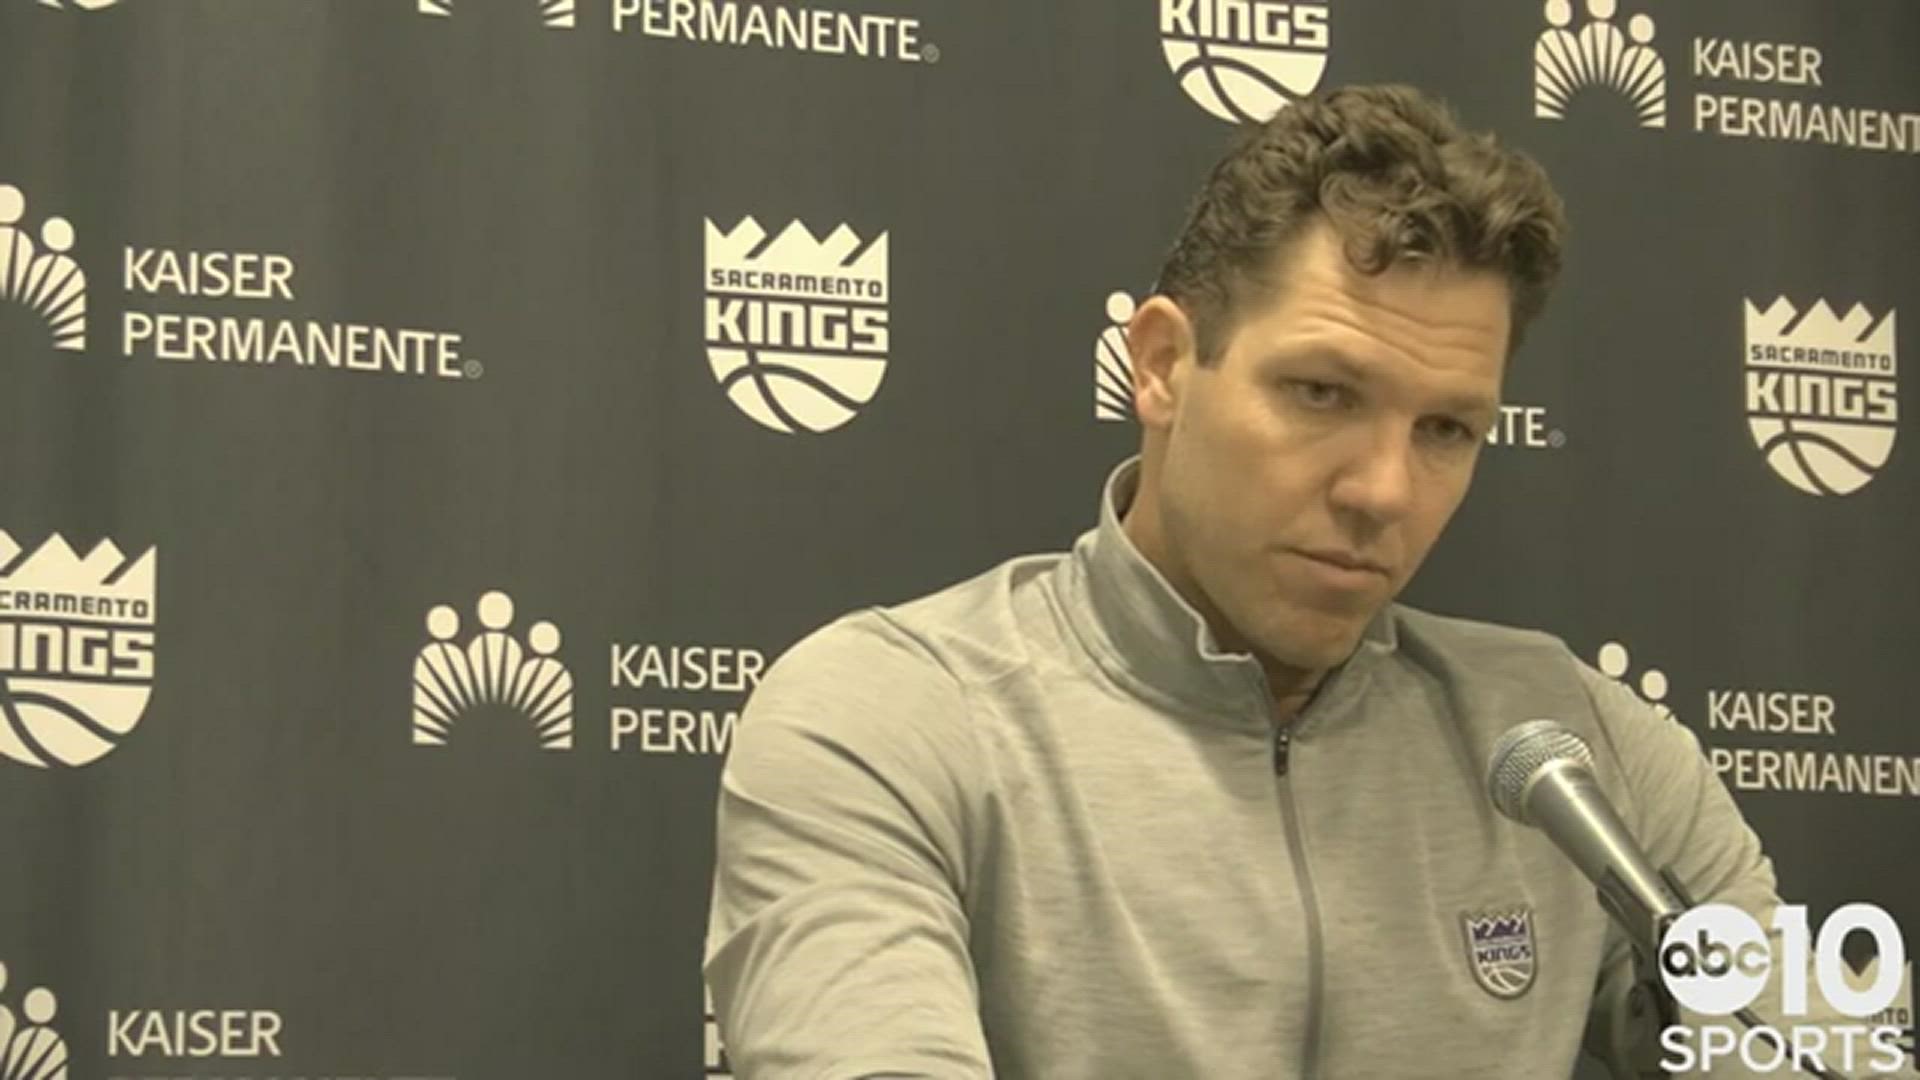 Kings' coach Luke Walton on Sunday's 105-99 loss in Dallas to the Mavericks, dropping the first road game of the season and discusses Sacramento's poor shooting.